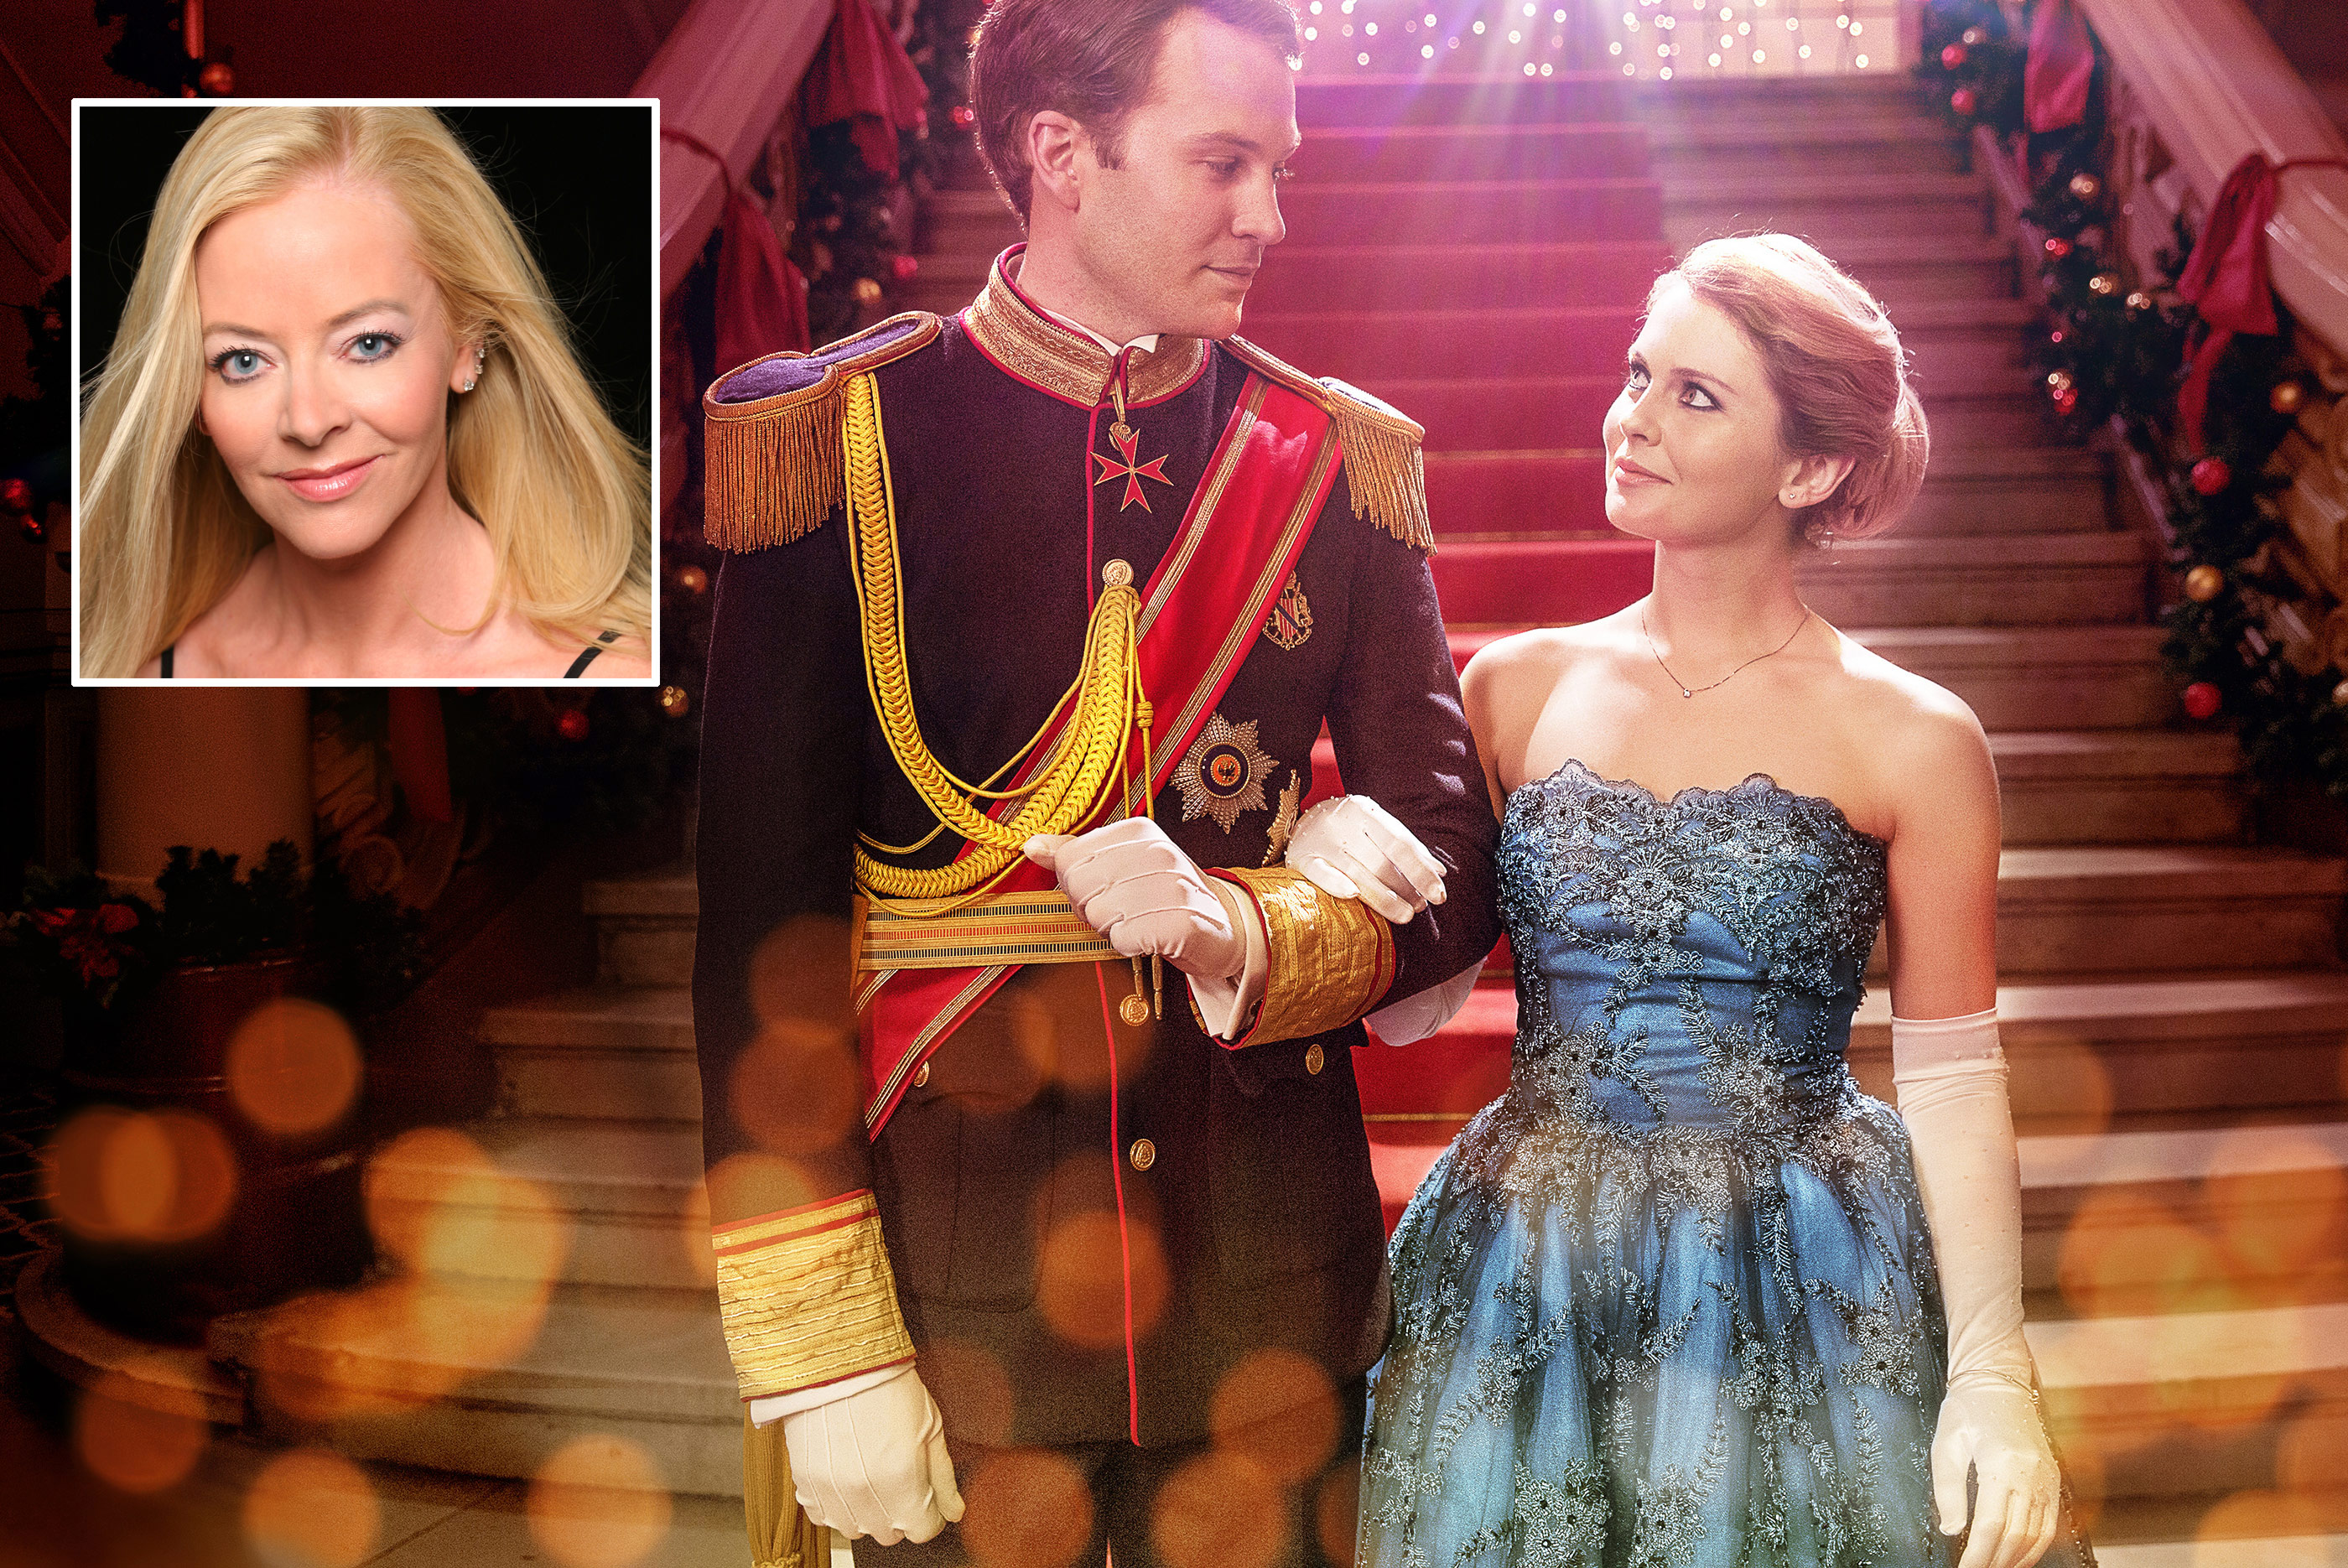 Meet the Screenwriter of Netflix’s “A Christmas Prince,” an Emmy-Award-Winning Journalist Who Cashed Out Her 401(k) at Age 40 to Pursue Her Dream